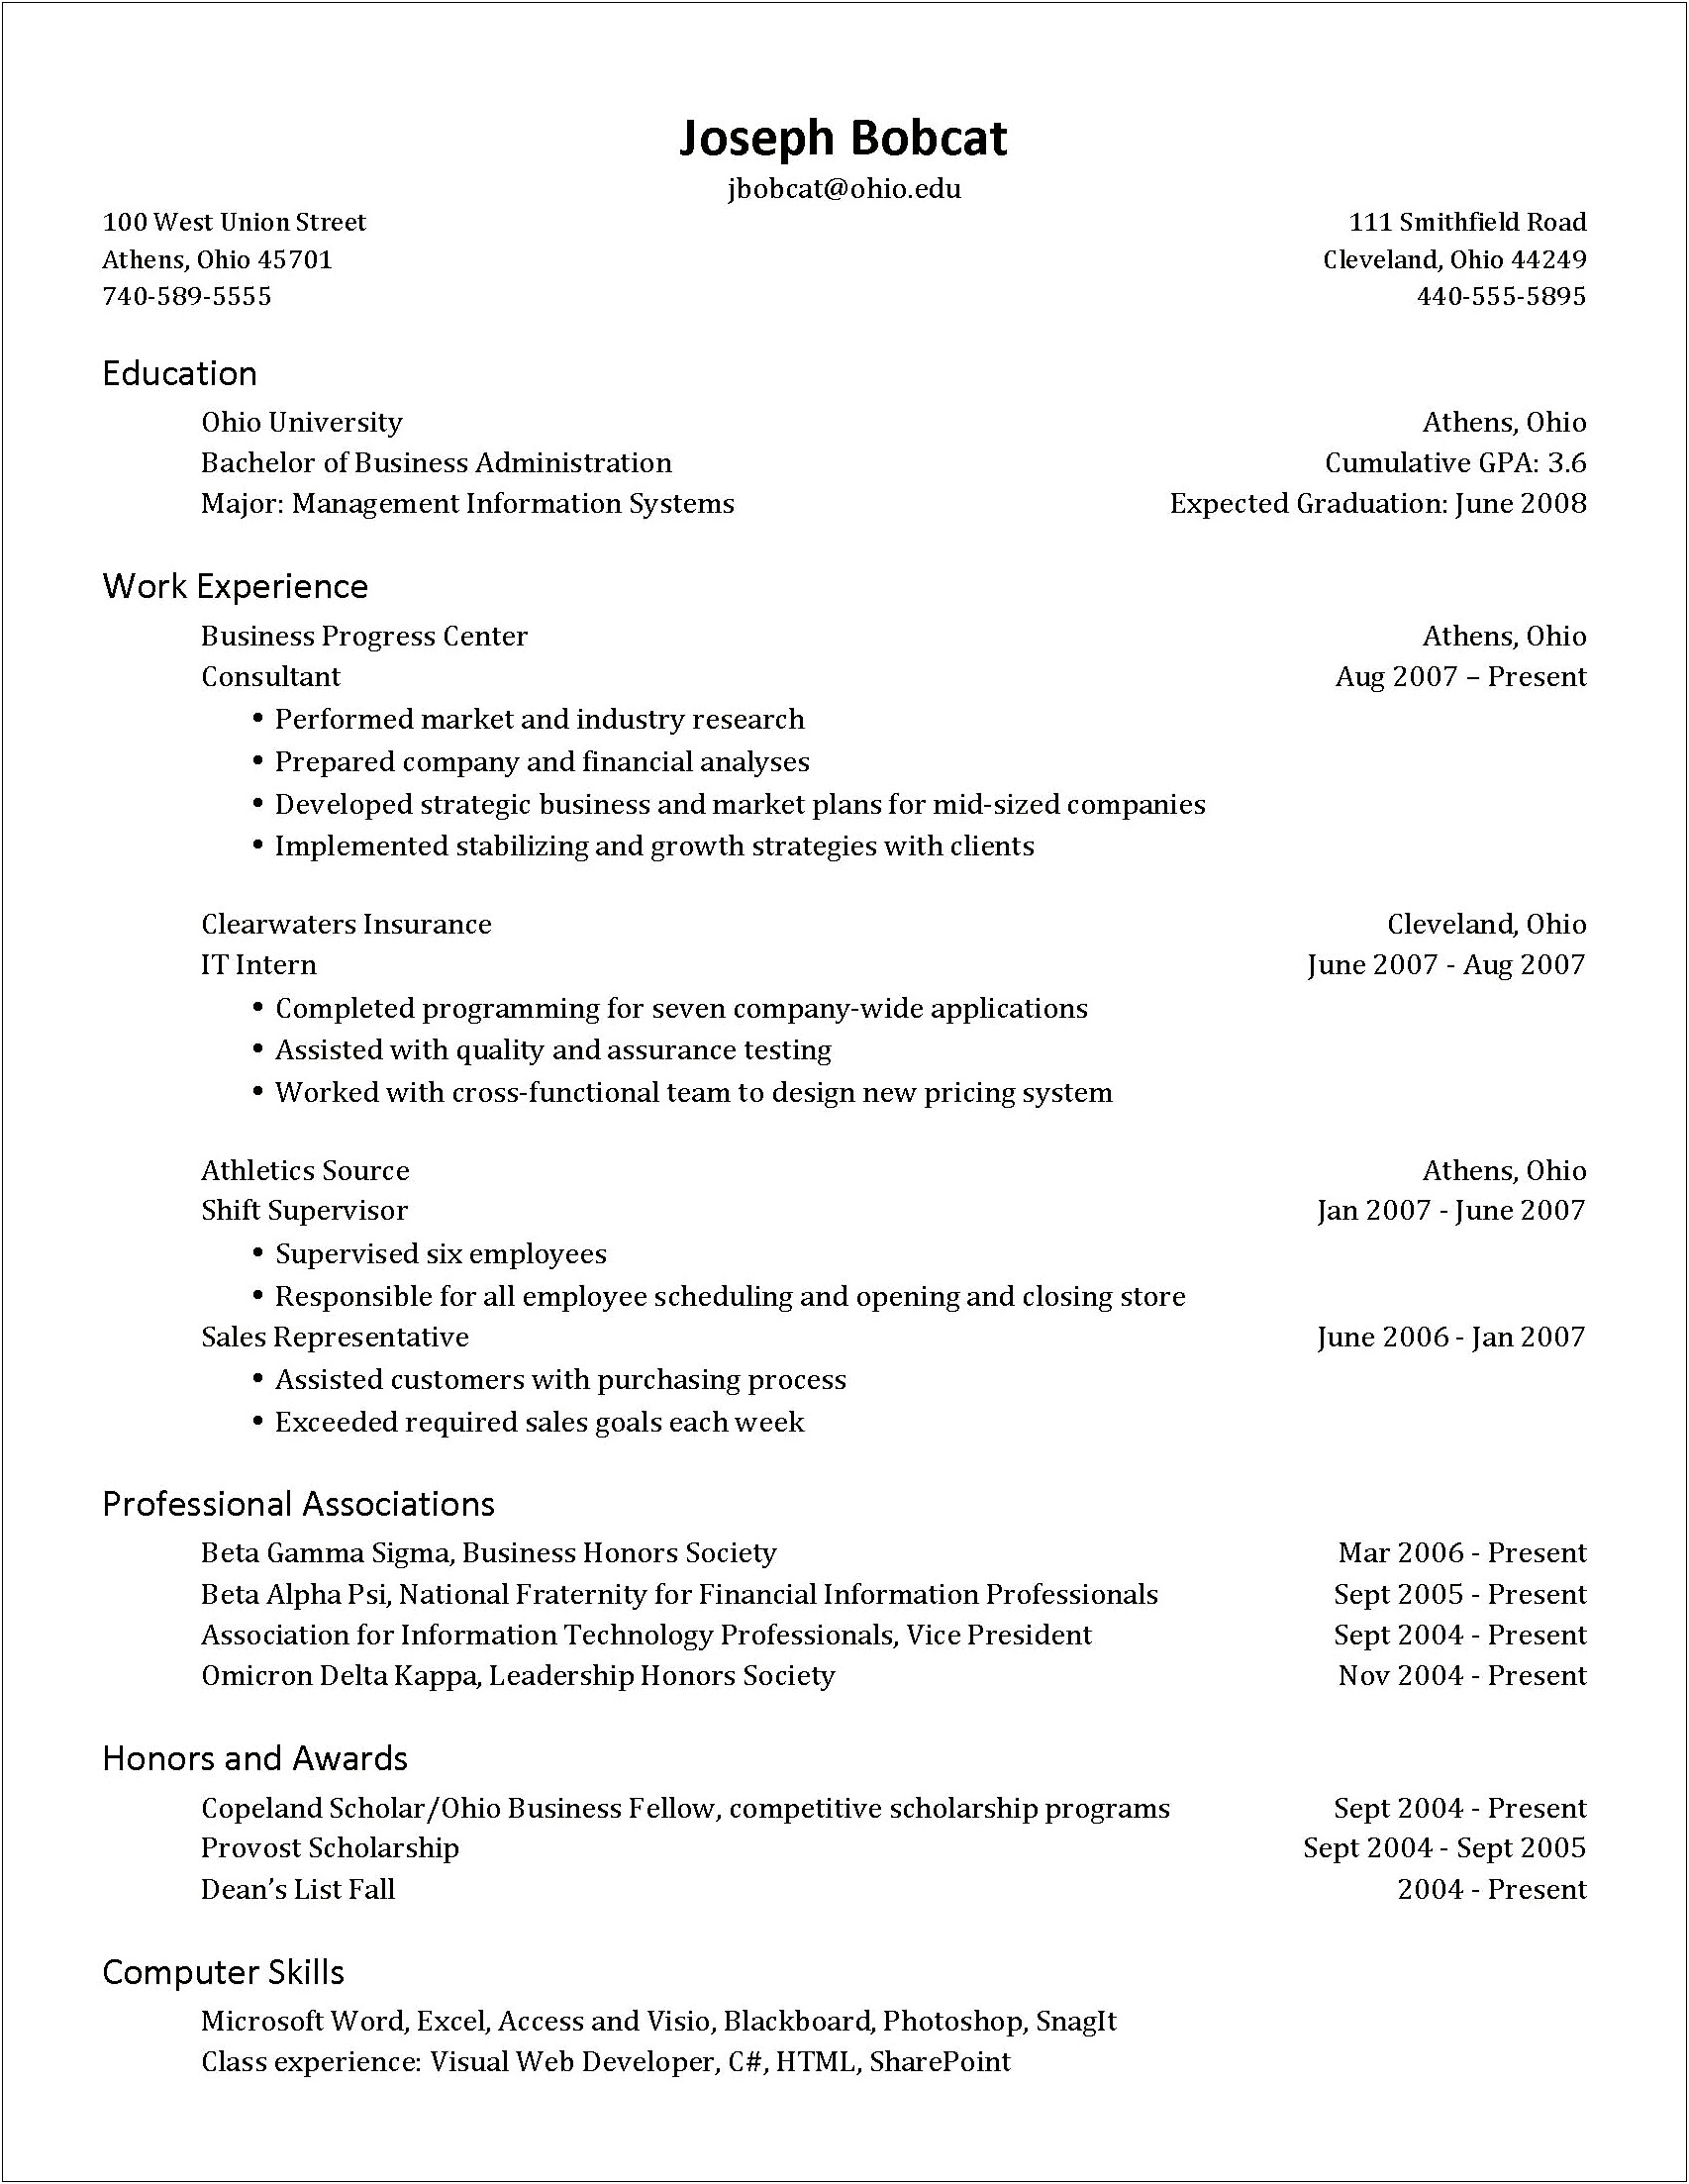 Right Align Dates On Resume Word